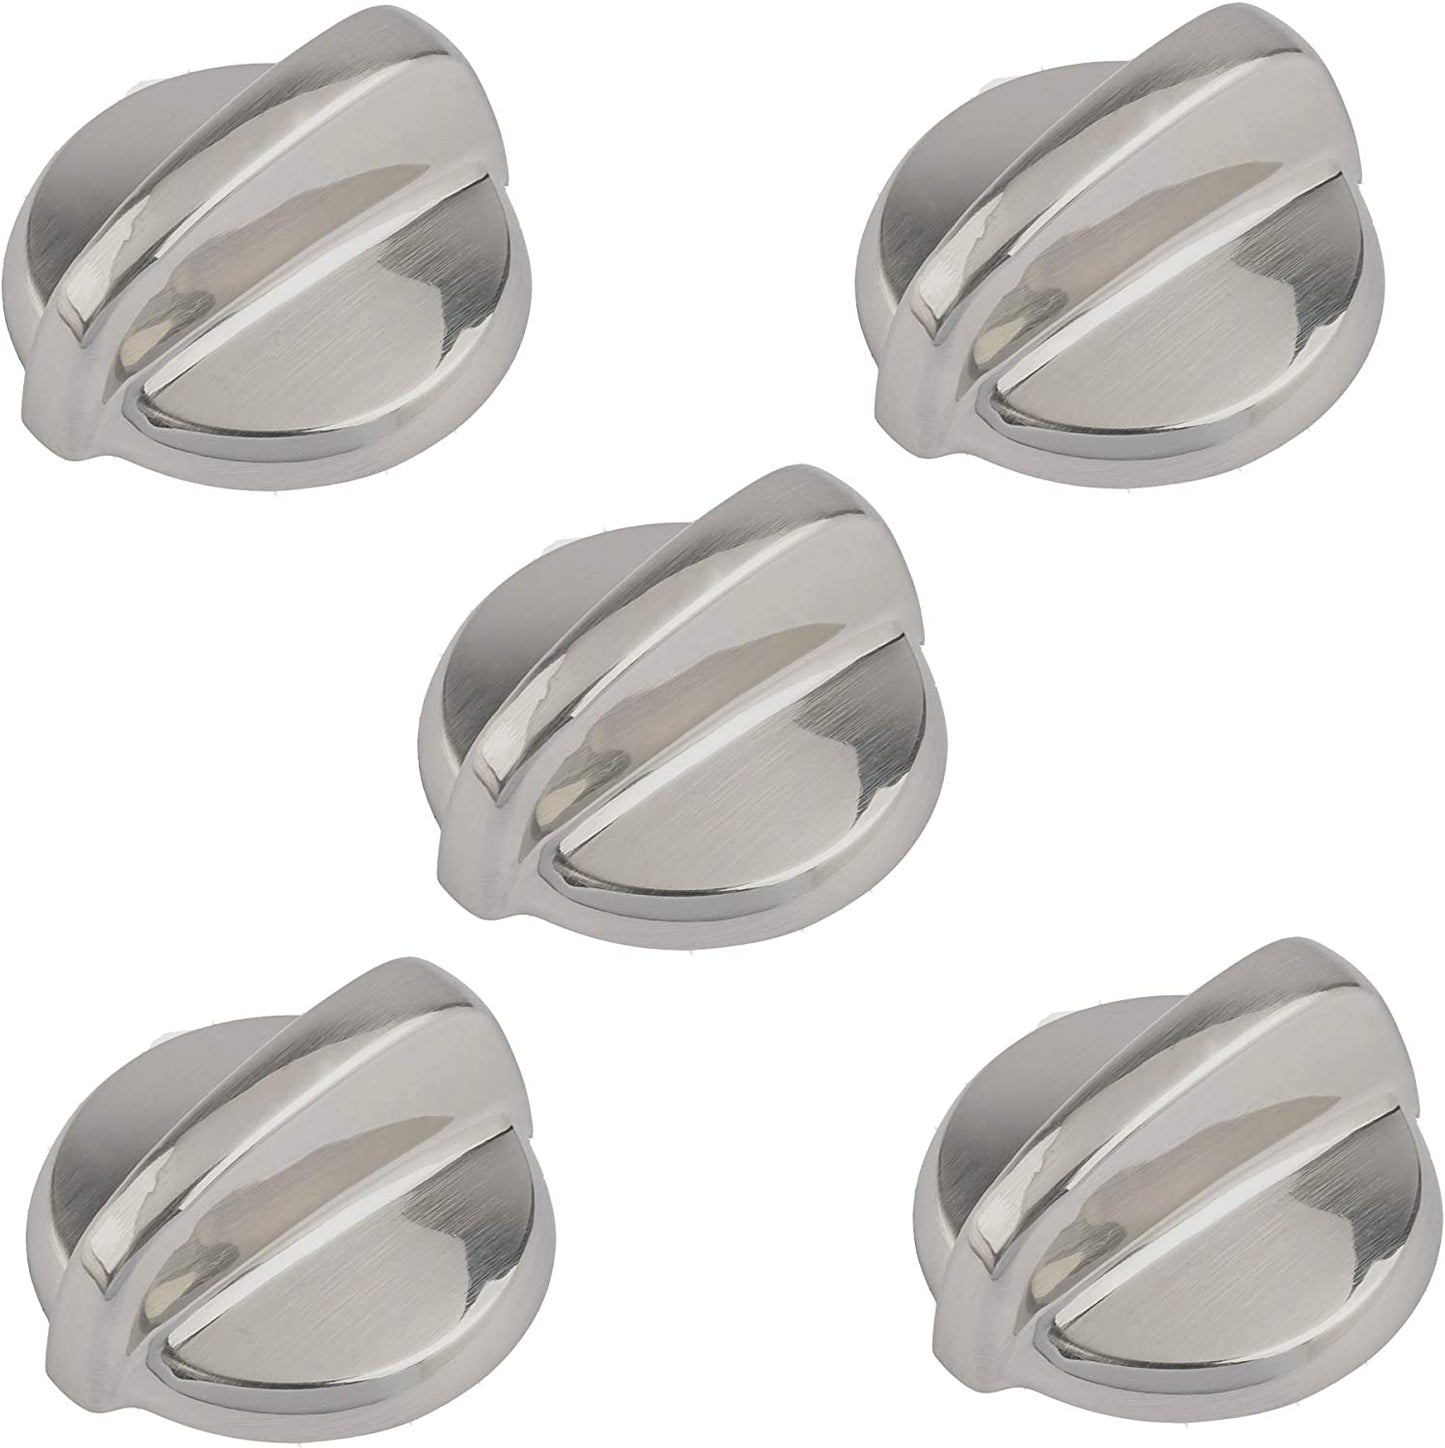 5 x WB03T10284 Knob Compatible with General Electric Stove/Range